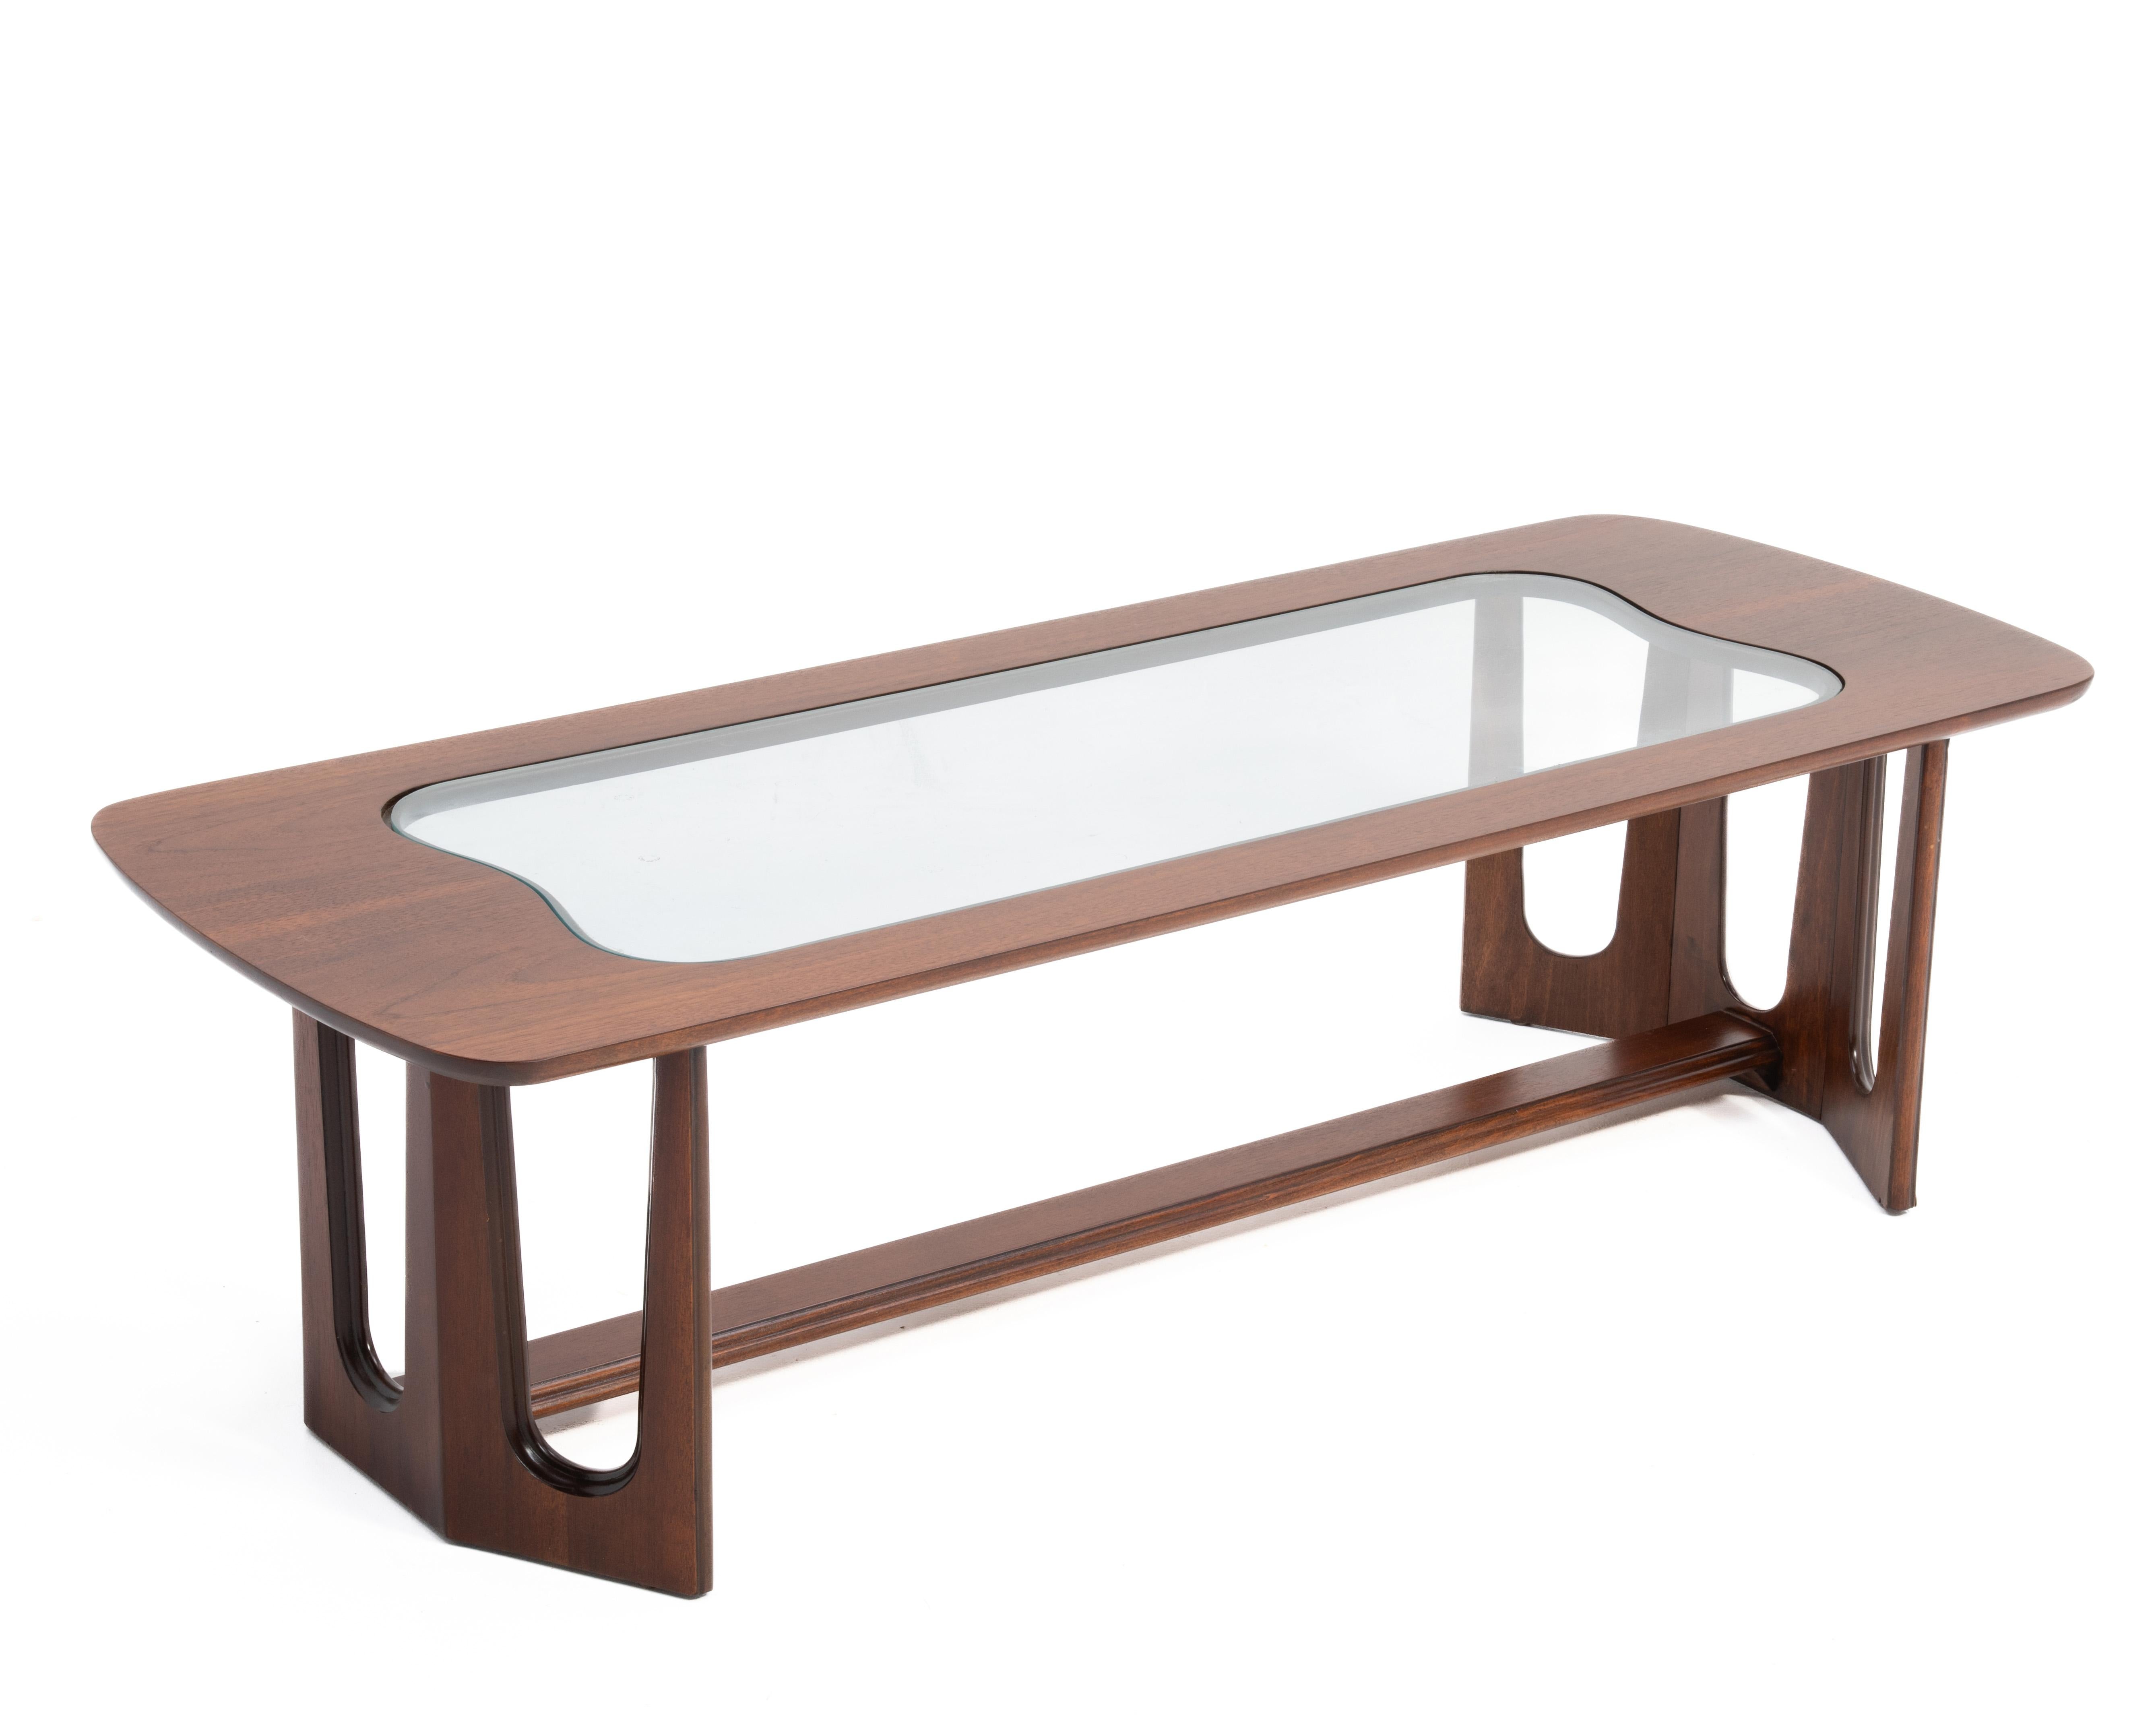 A Bassett mid century modern walnut coffee table after Adrian Pearsall with an organic and sculptural shape top, base and glass insert.